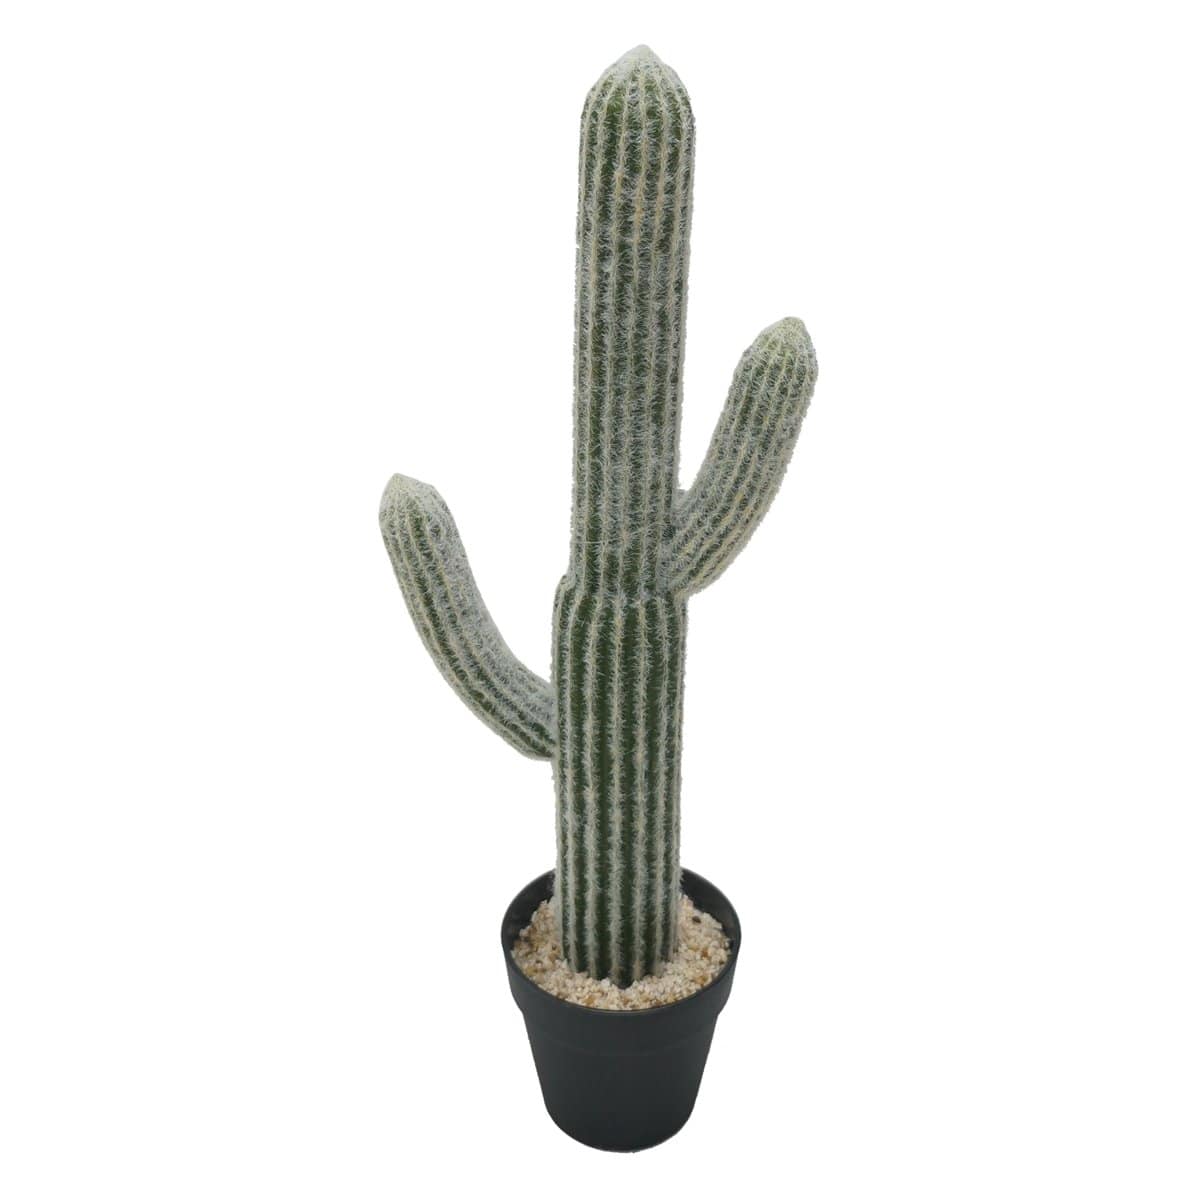 AB-F29563 Potted Faux Saguaro Cactus picket and rail